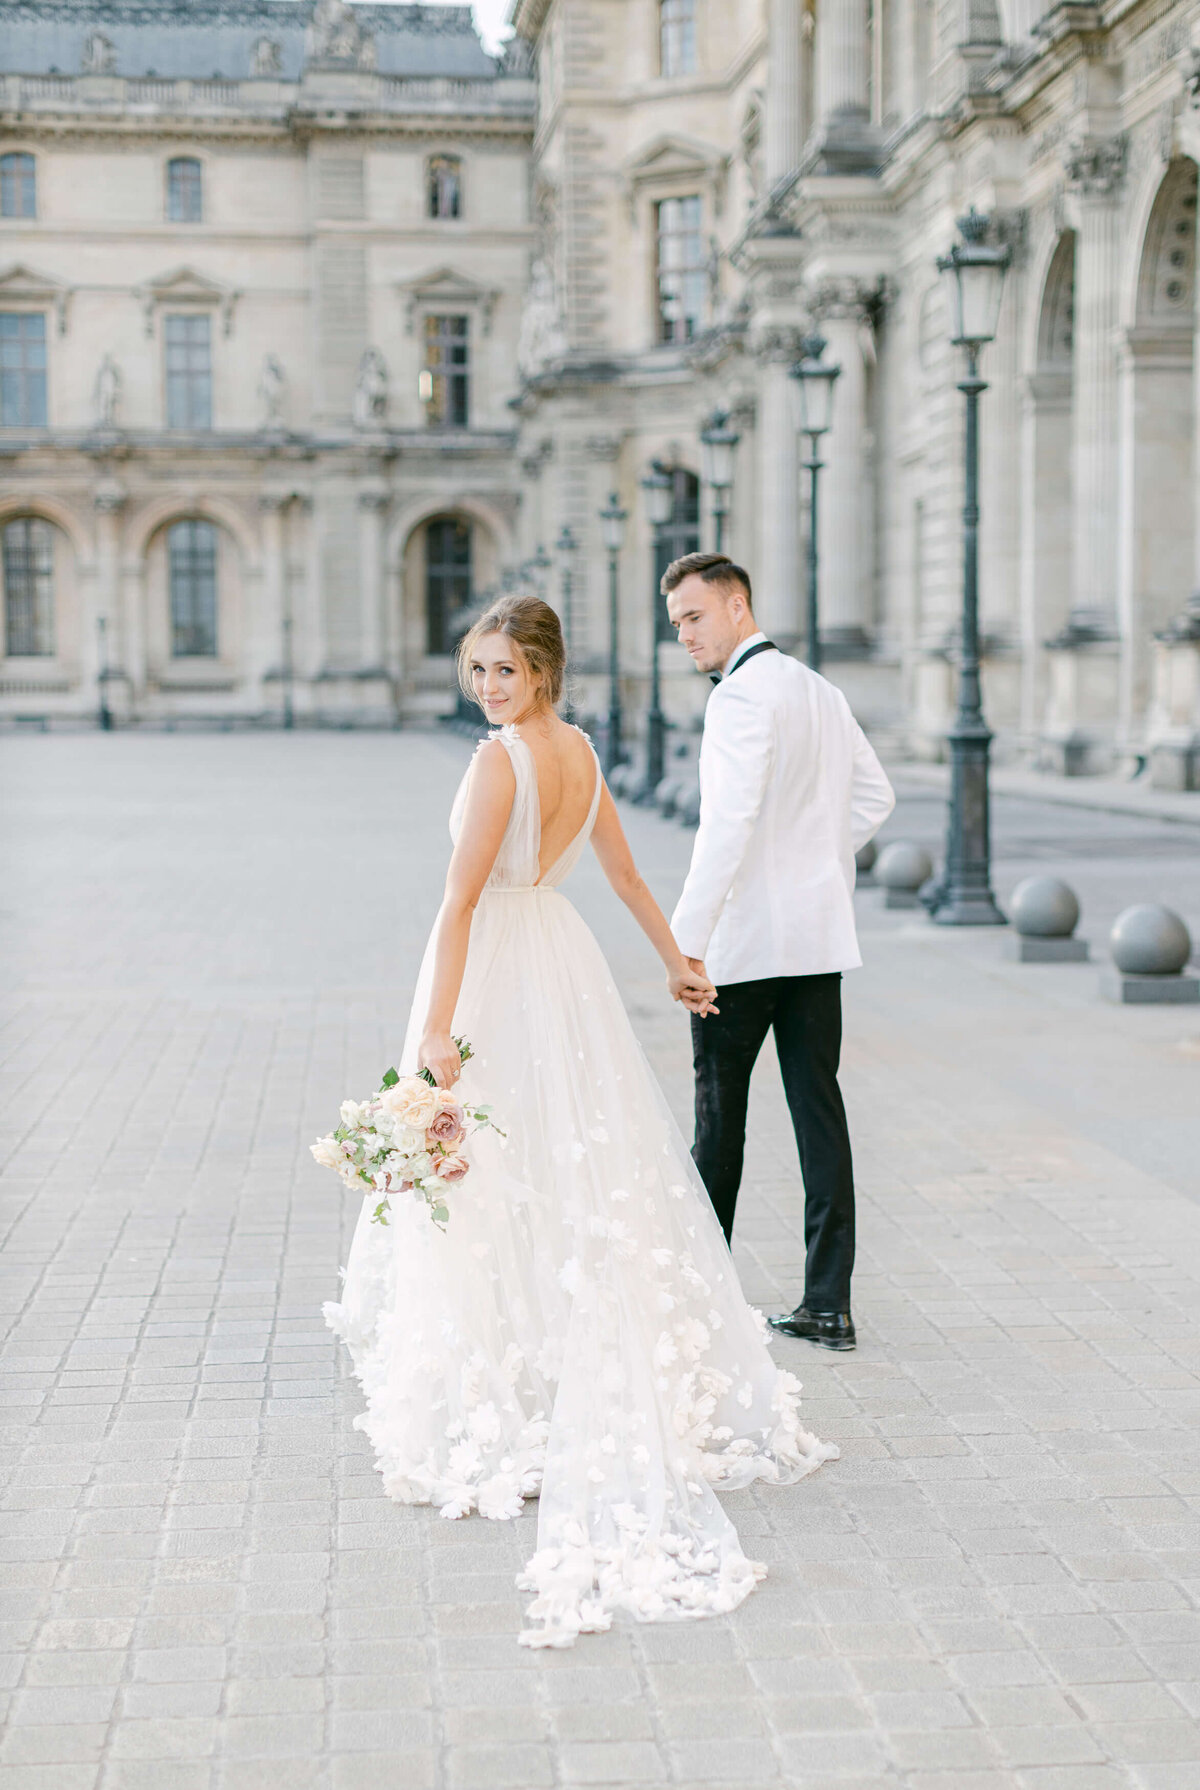 A bride and groom walk in the courtyard of the Louvre